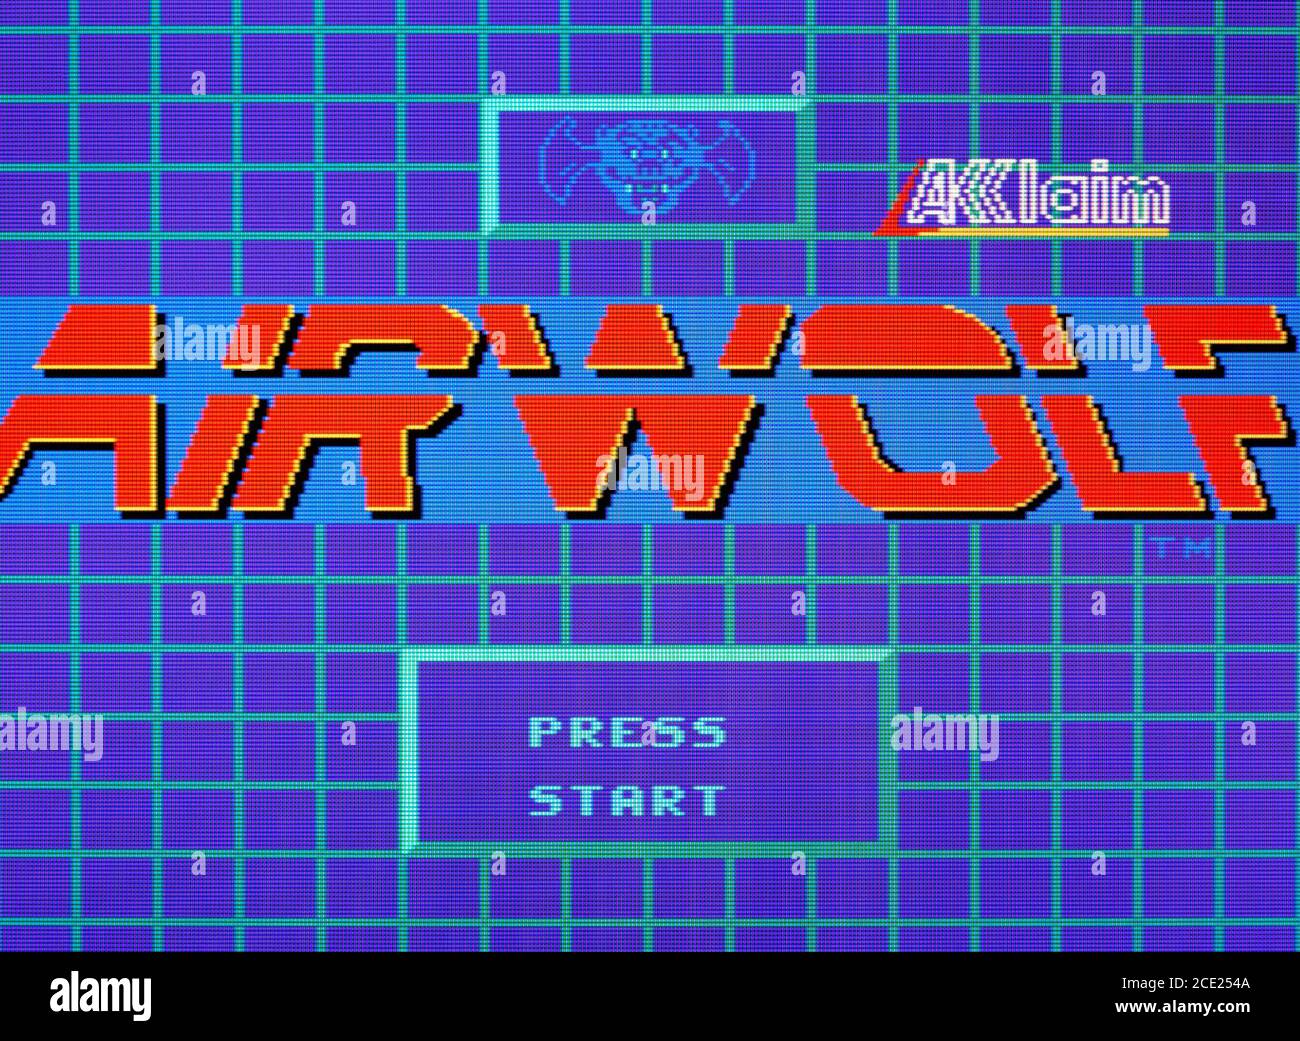 Airwolf - Nintendo Entertainment System - NES Videogame - Editorial use  only Stock Photo - Alamy